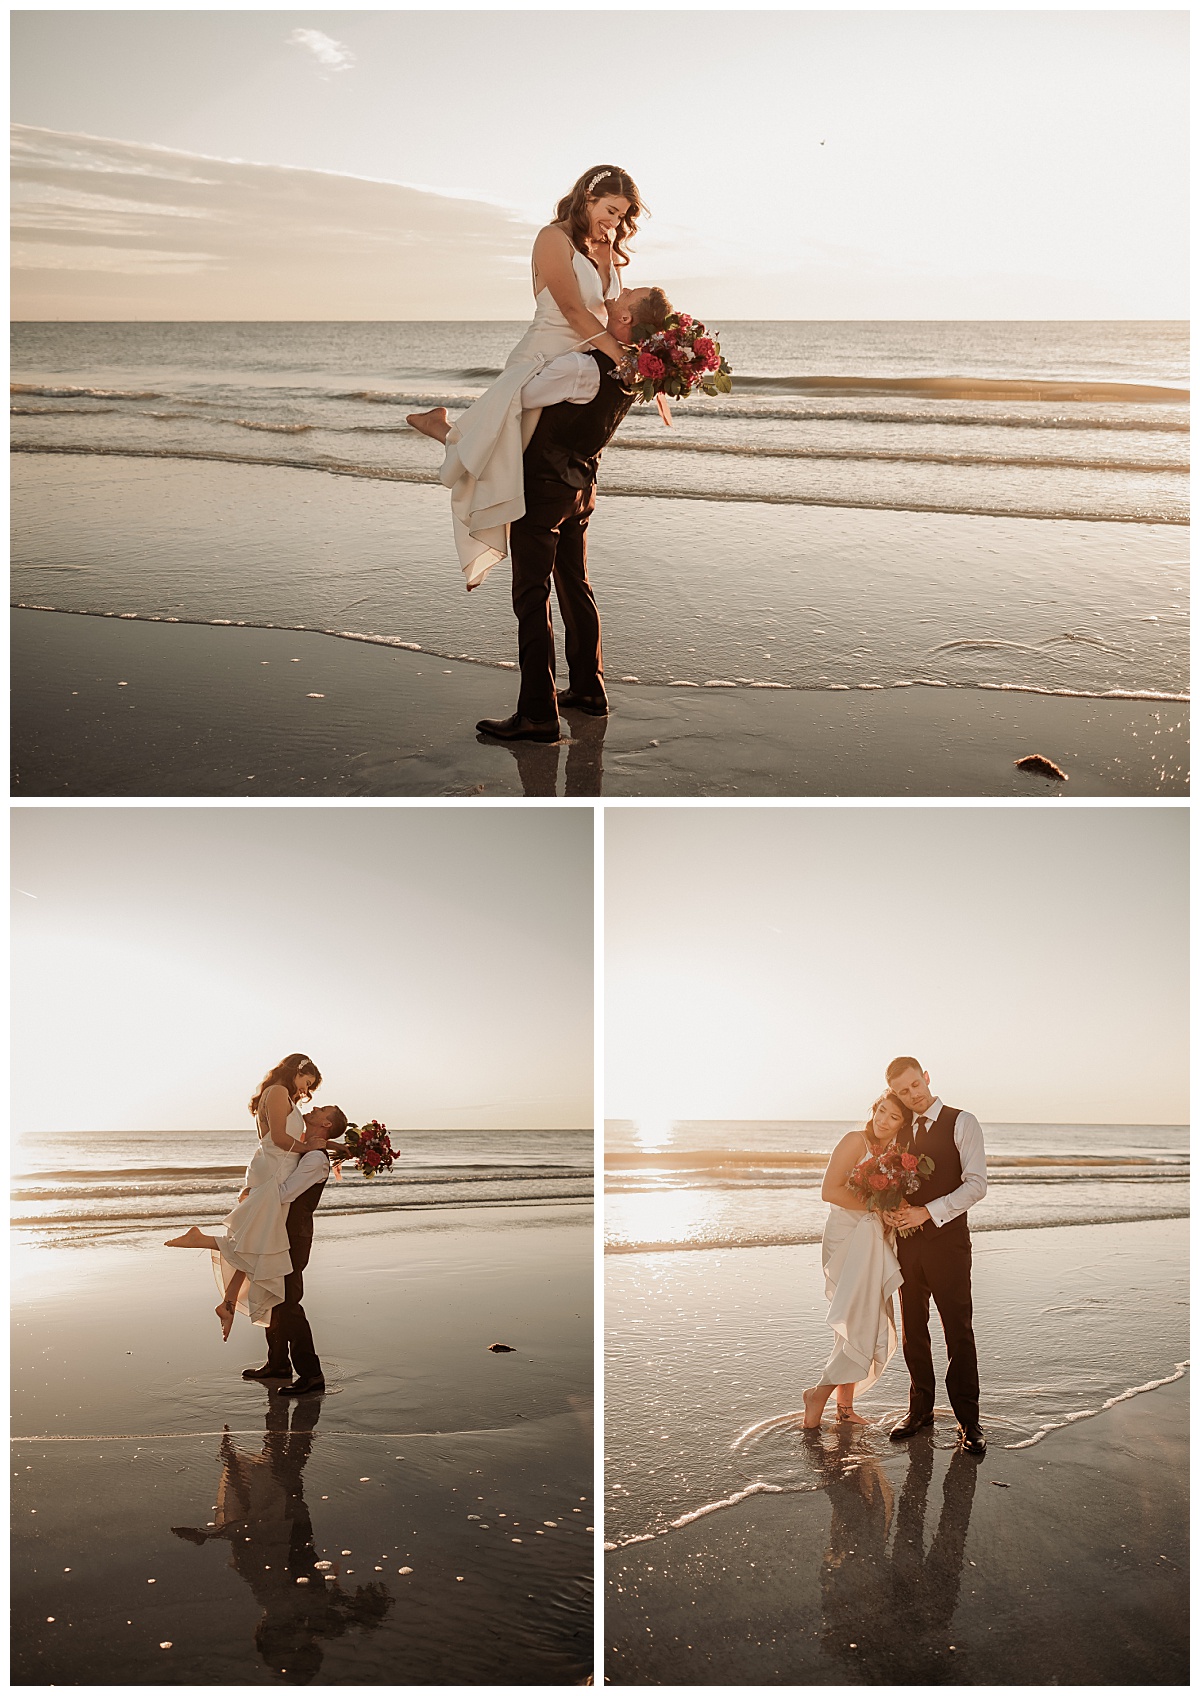 Groom lifts bride in the air on the beach for wedding photos in Madeira Beach, FL. 